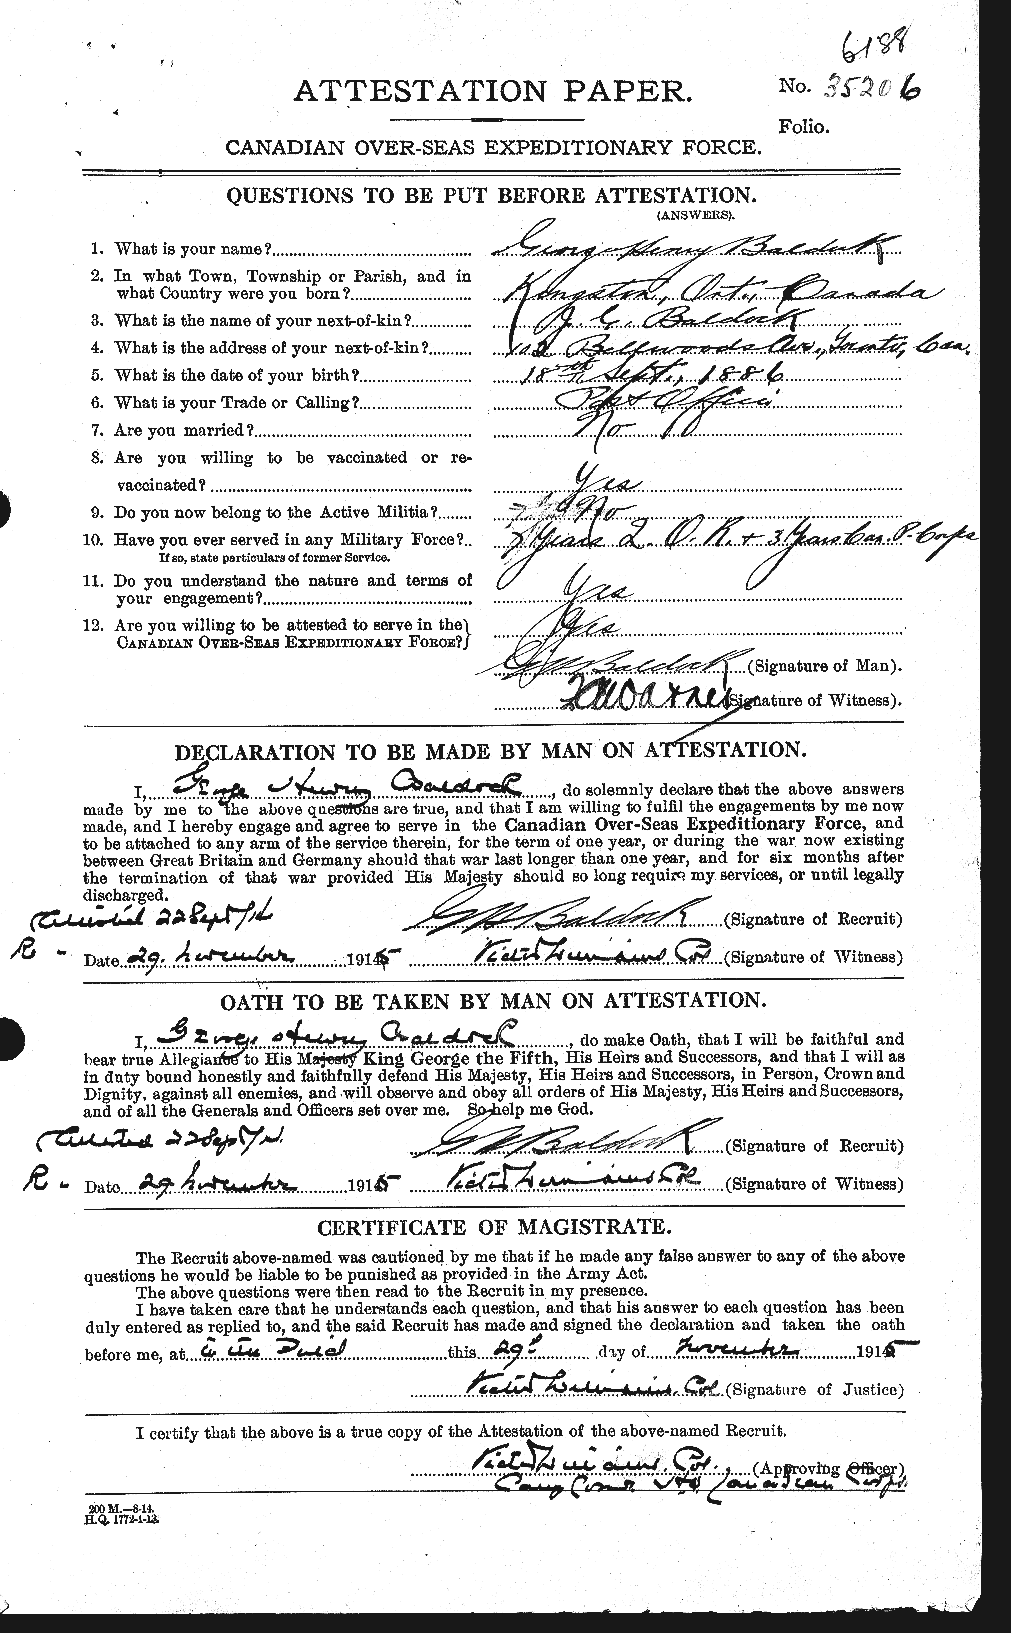 Personnel Records of the First World War - CEF 225374a